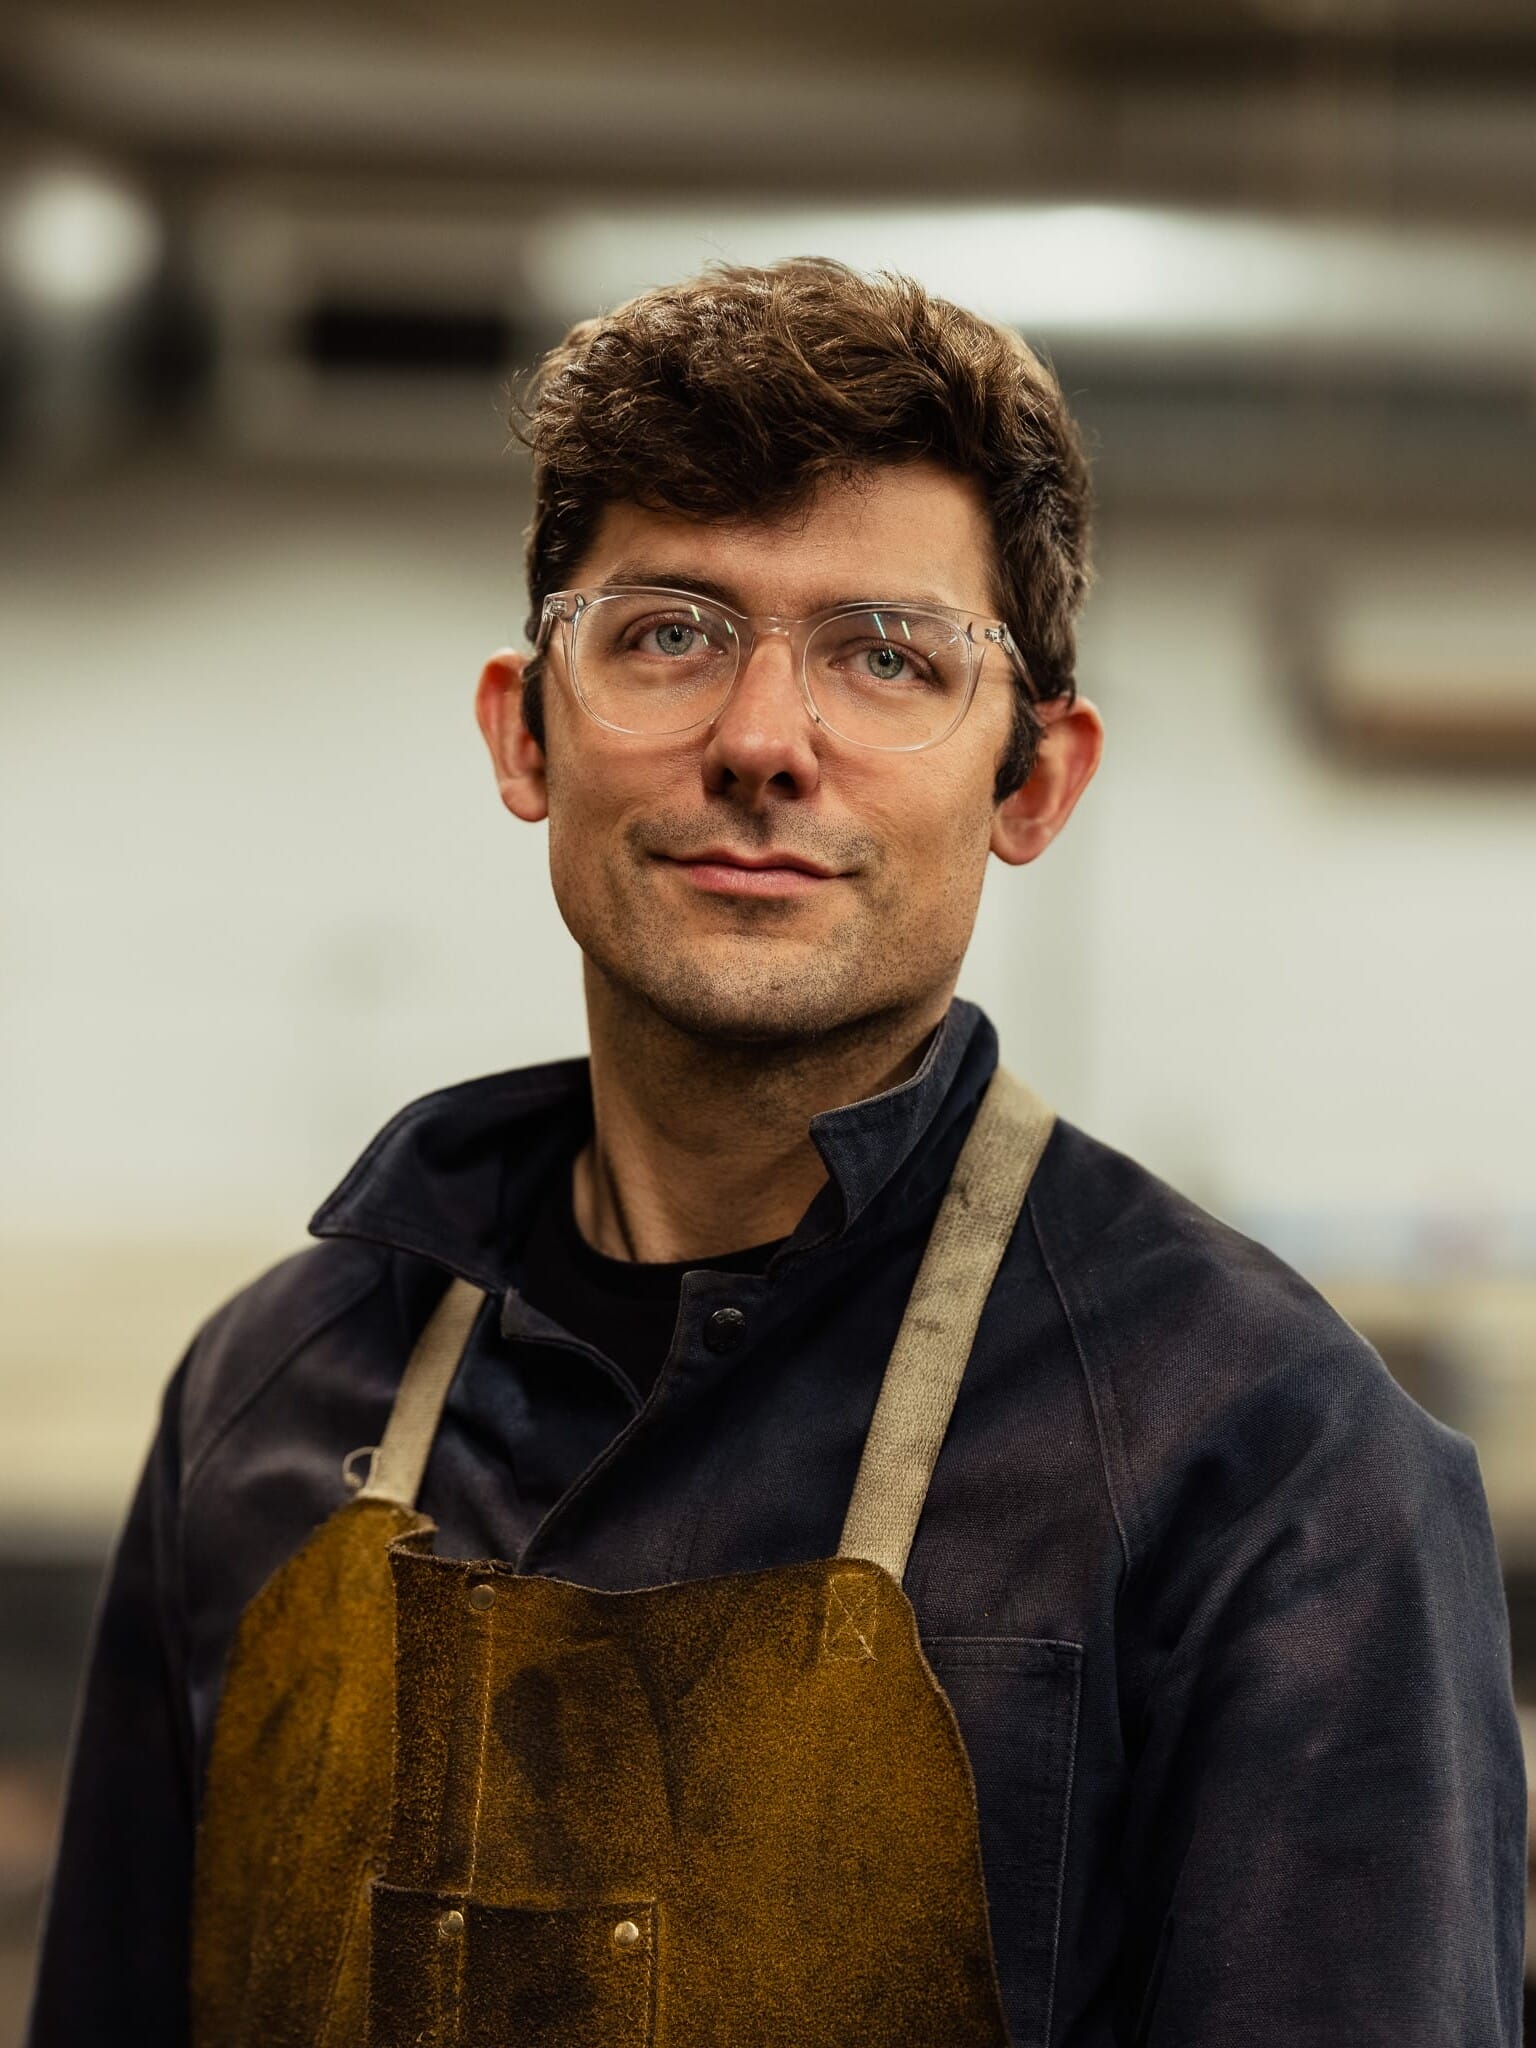 A man wearing glasses and an apron in a workshop.